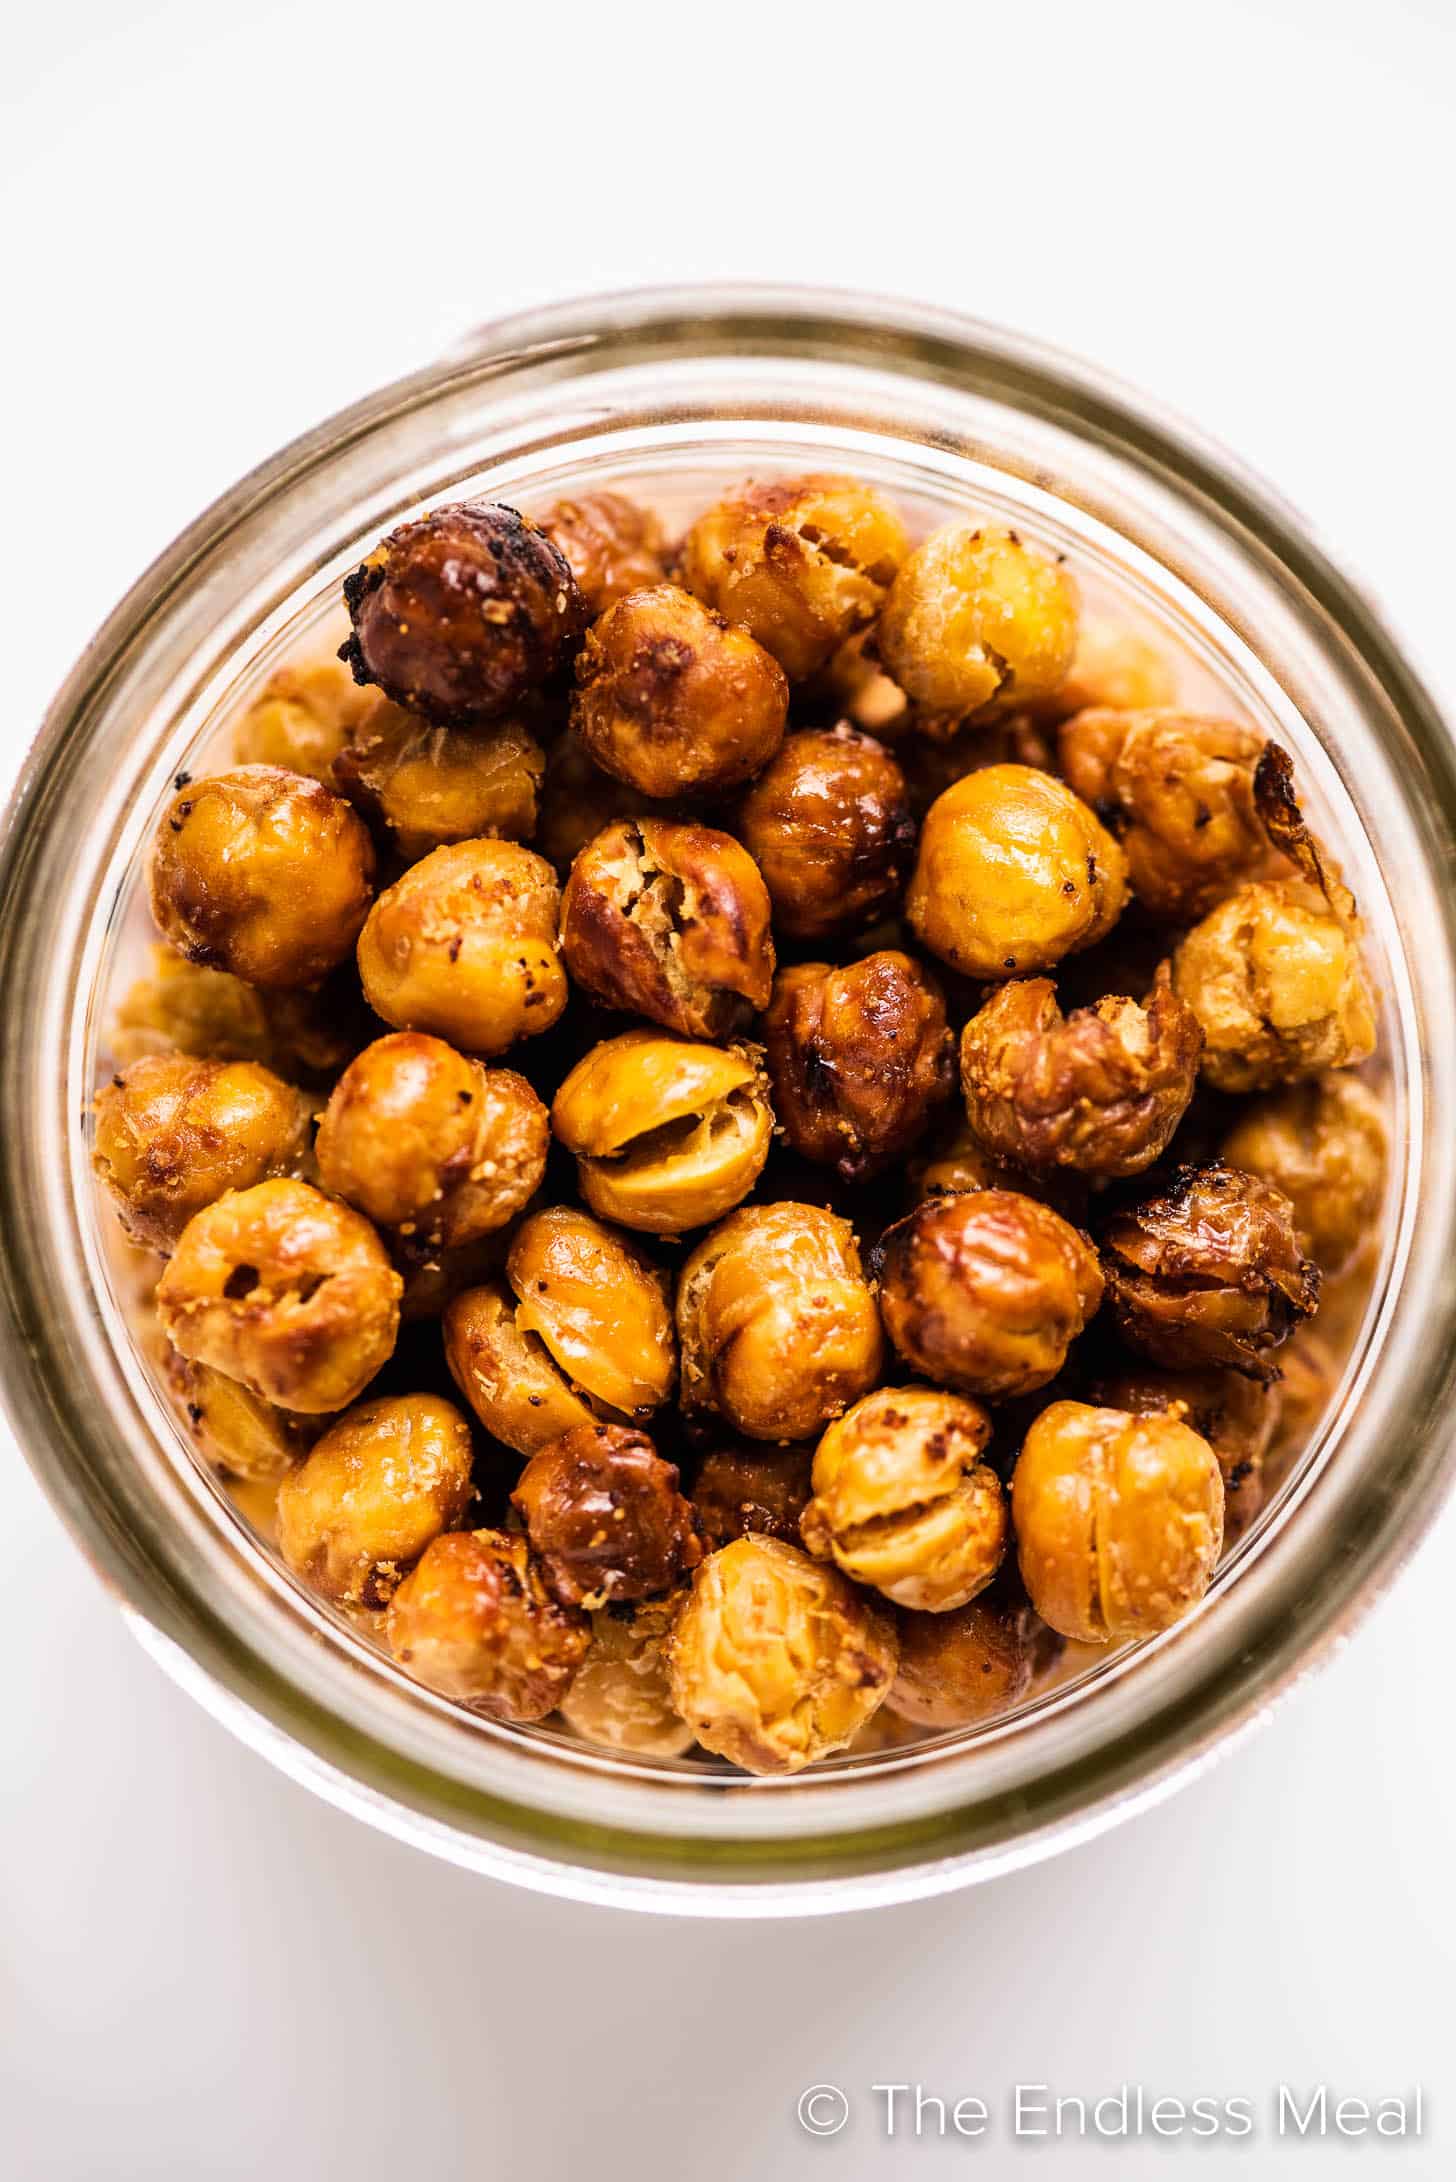 Roasted Chickpeas in a jar